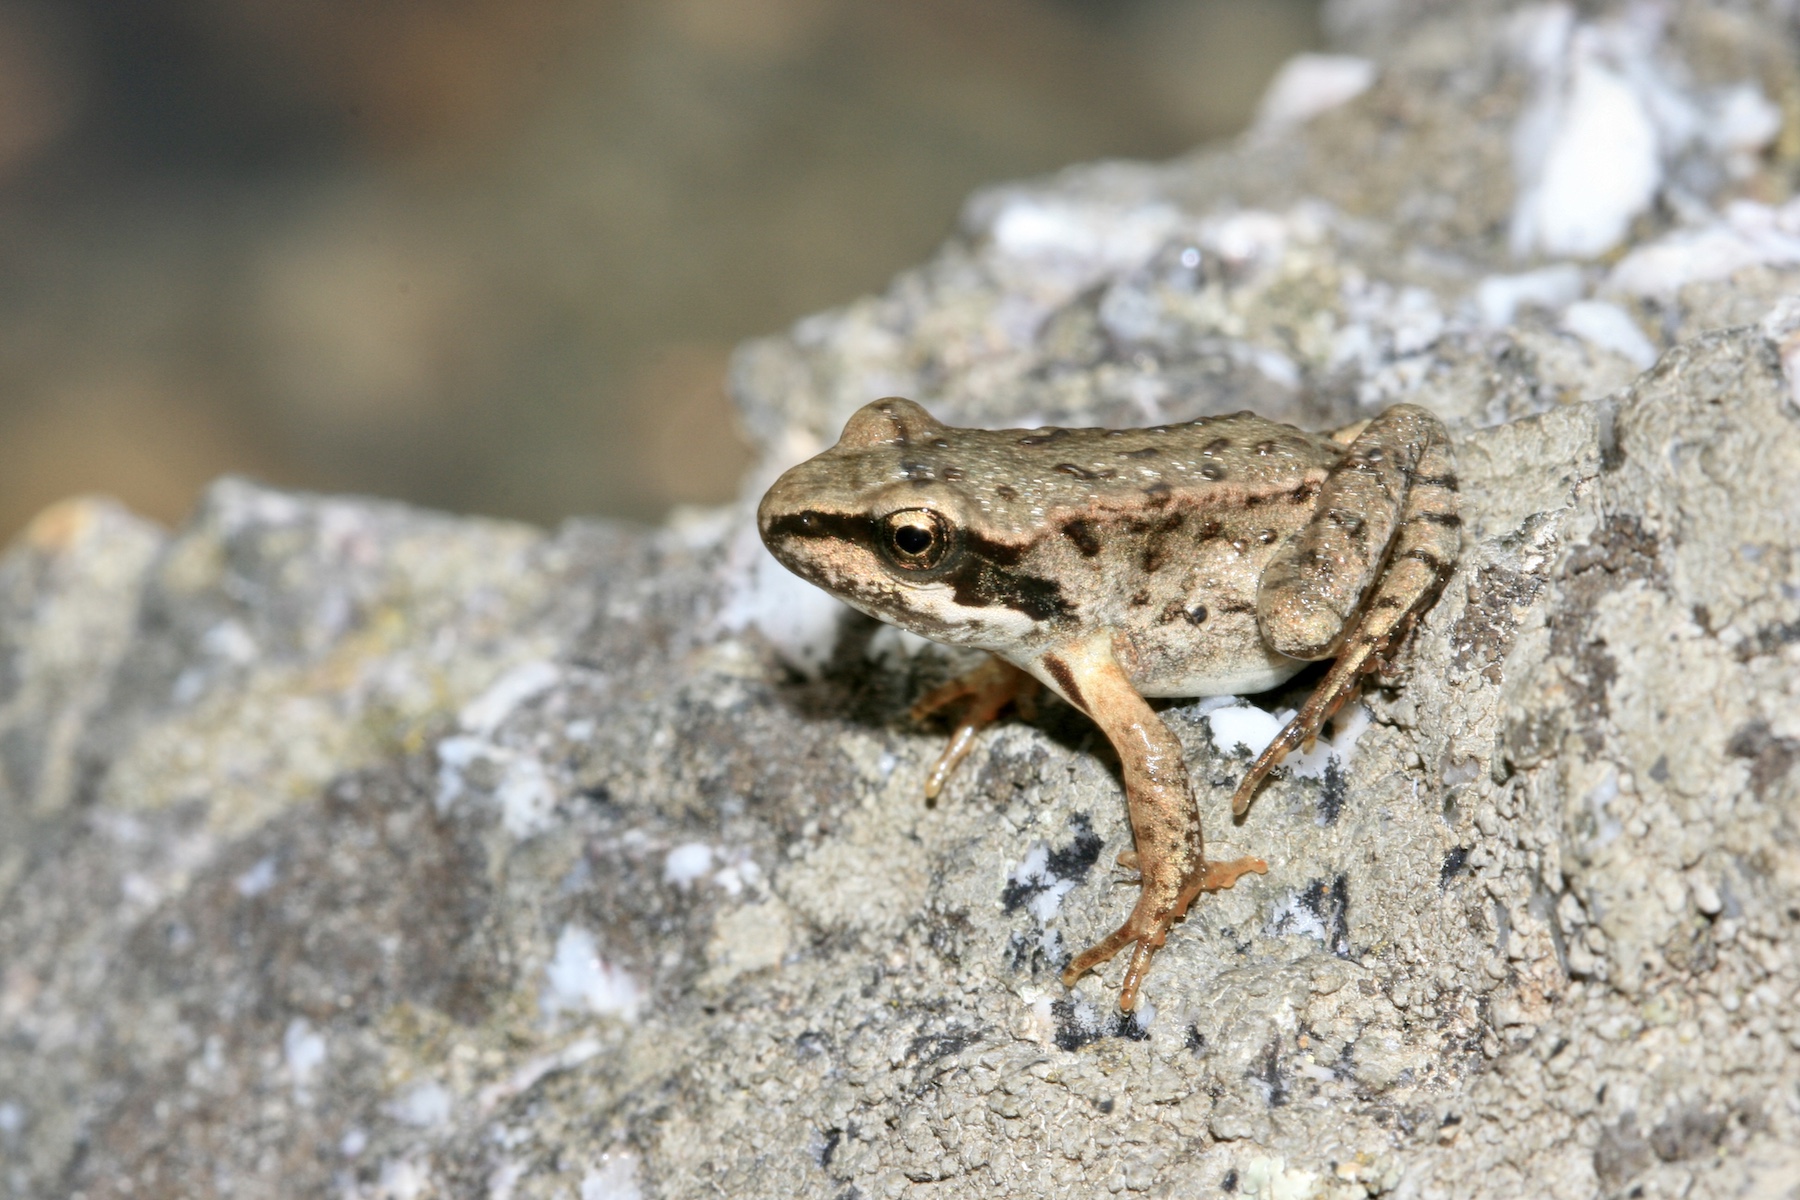 Swiss People Kept Digging Ponds For 20 Years And Now Endangered Frog Populations Have “Exploded”